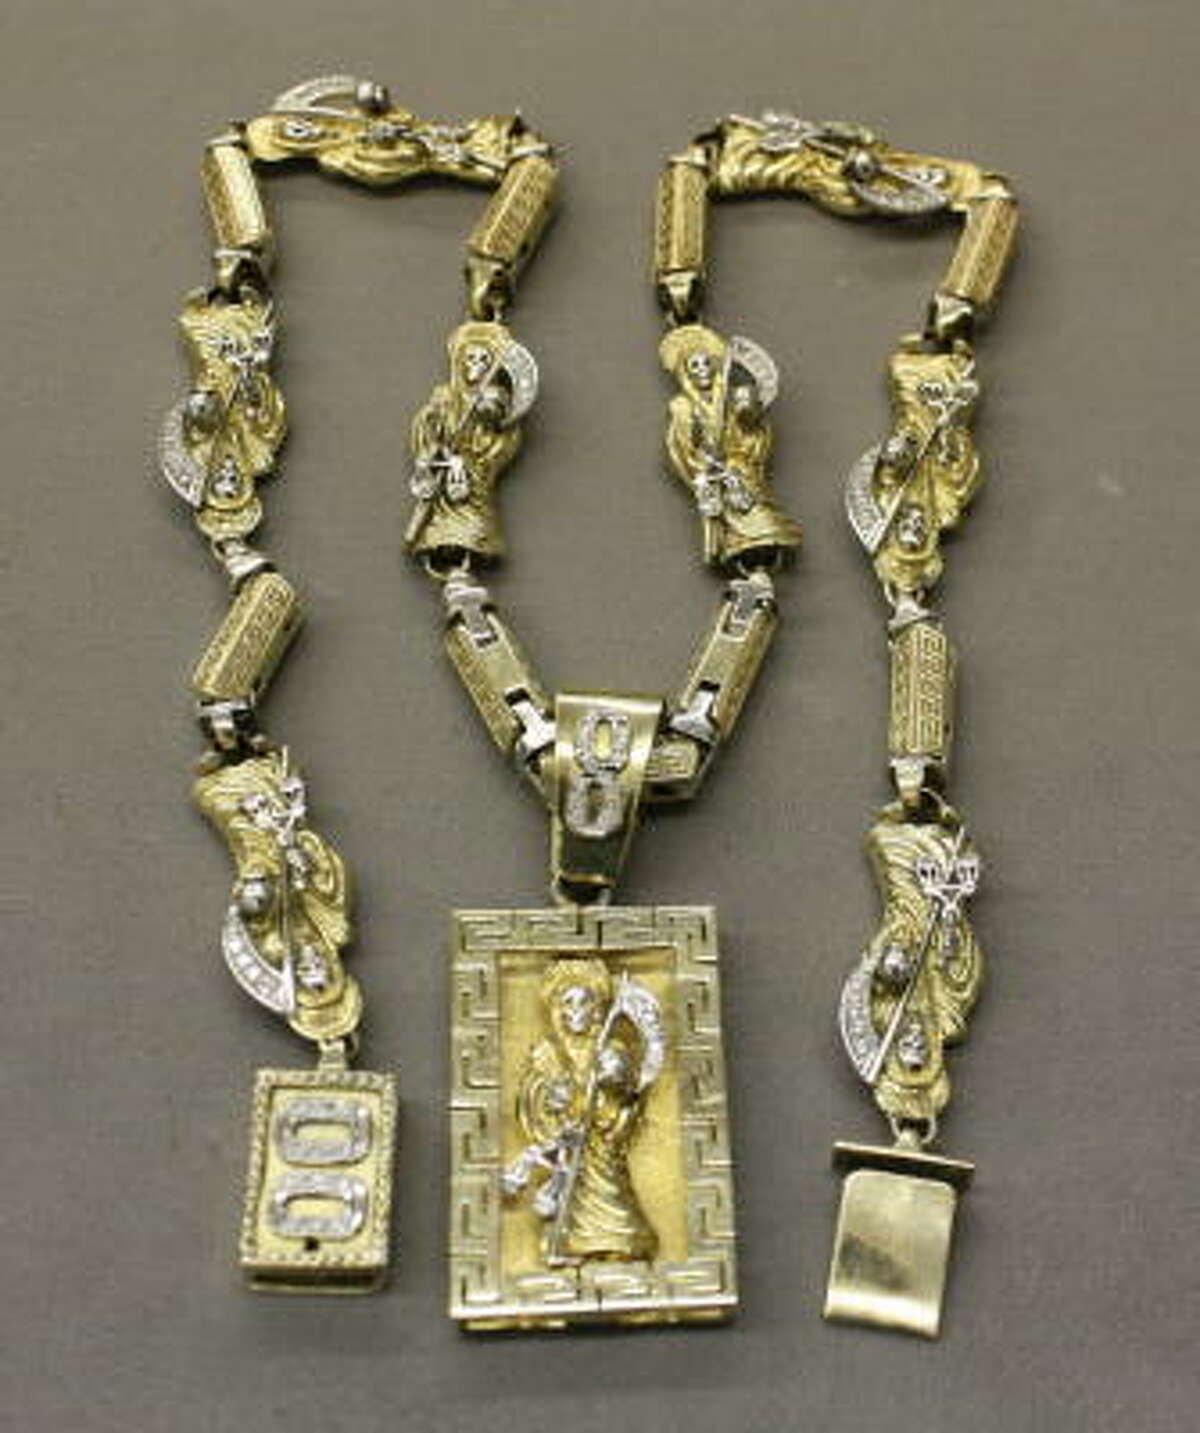 Jewelry and other lavish items seized from criminals are hitting the auction block. Among them is a diamond and gold Santa Muerte necklace (full story).